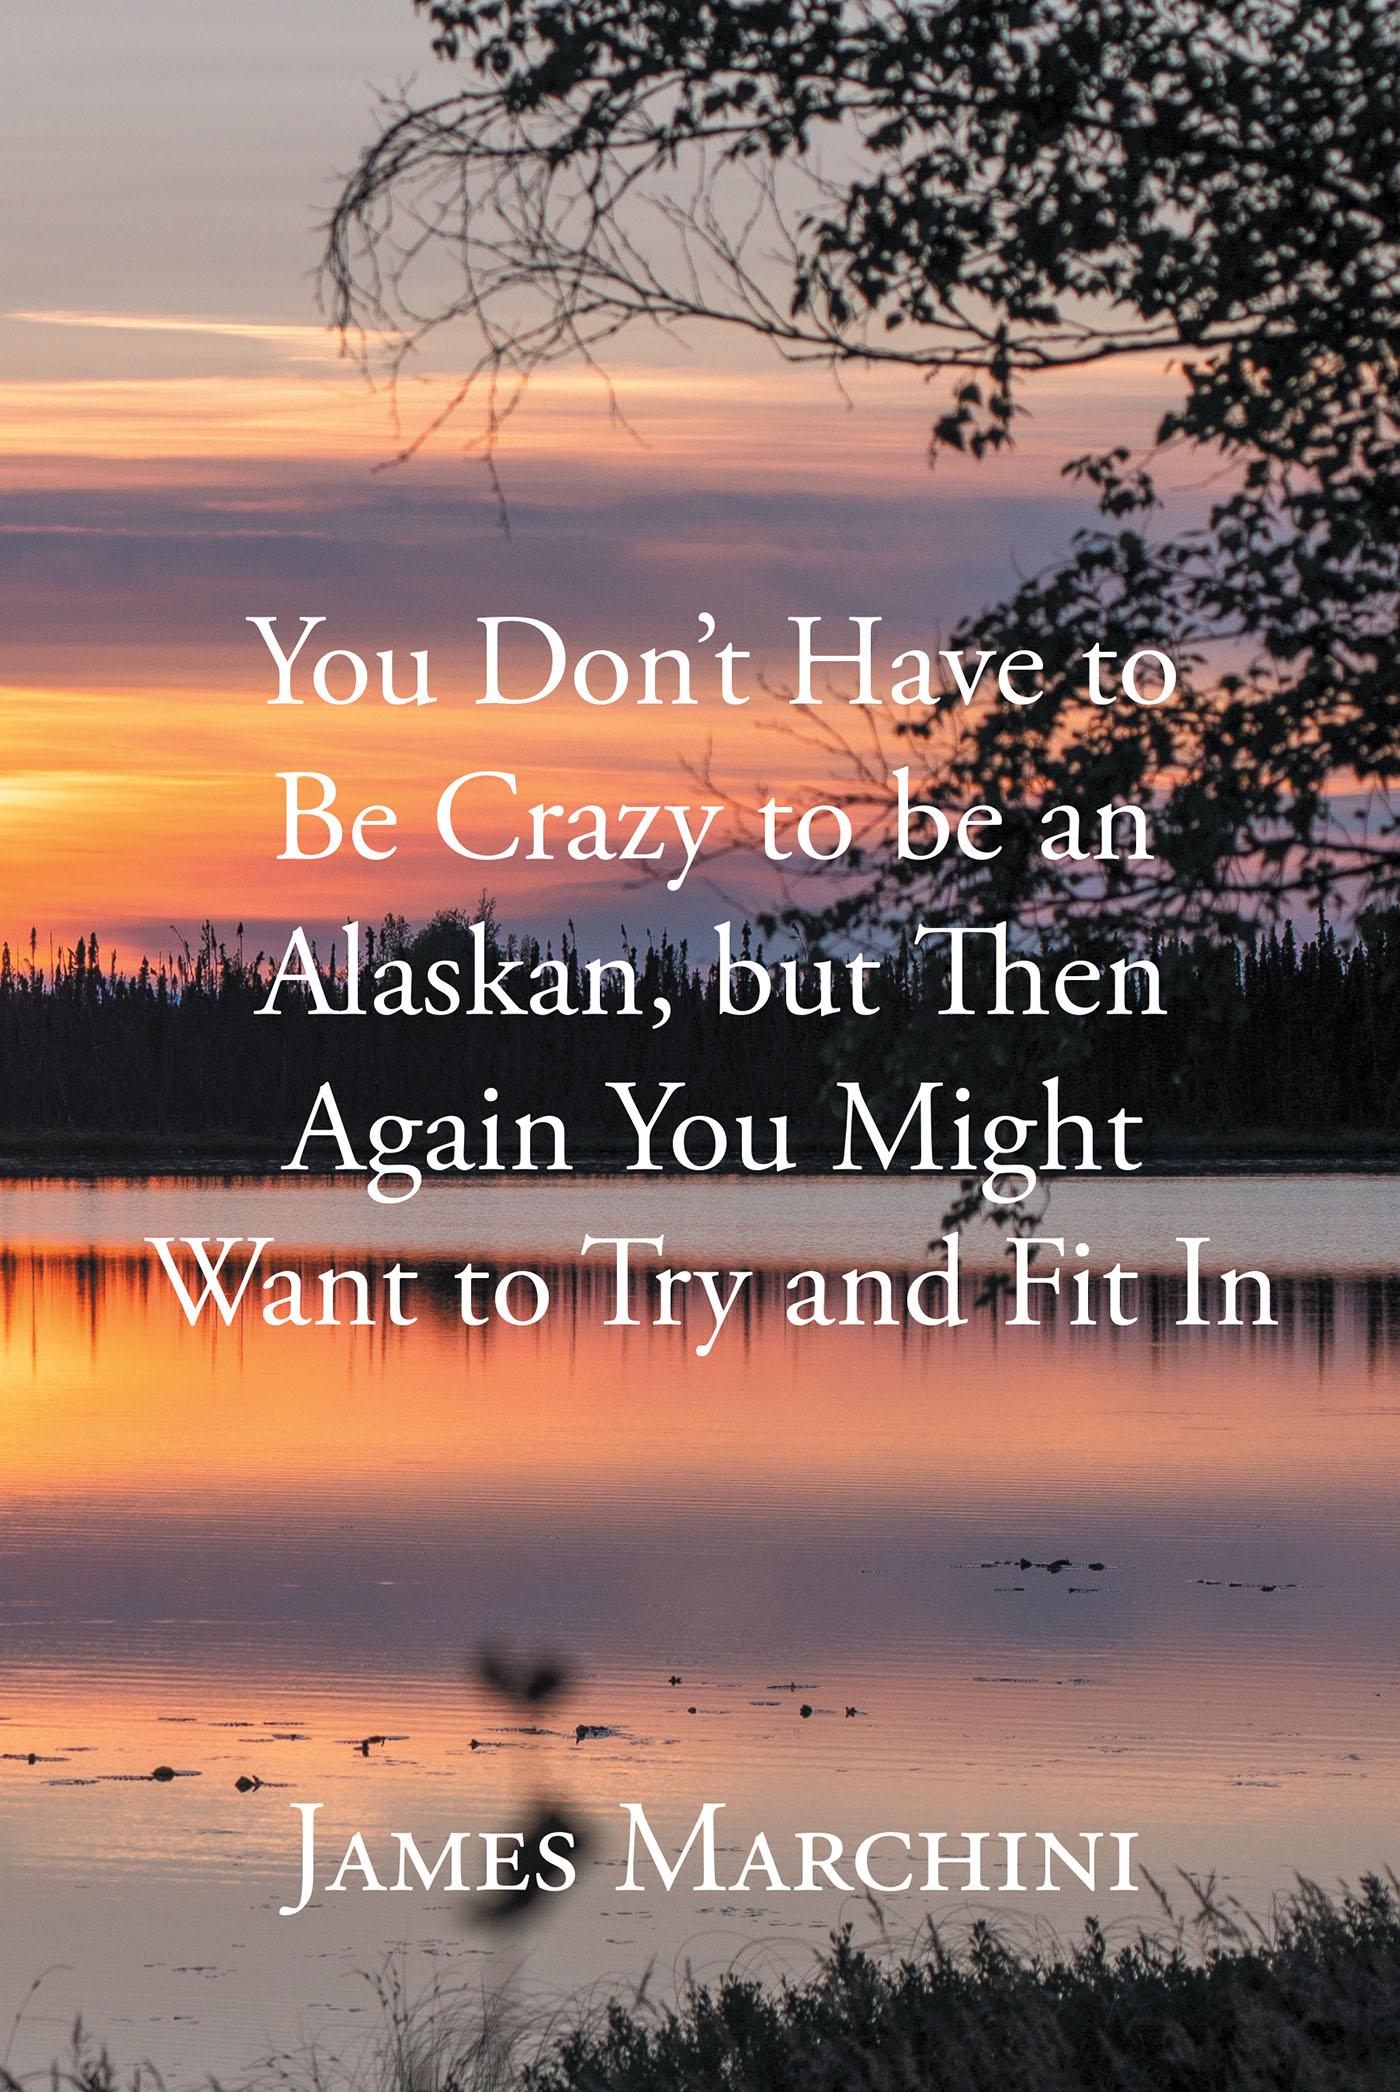 Author James Marchini’s New Book “You Don’t Have to Be Crazy to be an Alaskan, but Then Again You Might Want to Try and Fit In” is a Fascinating Account of a Unique life